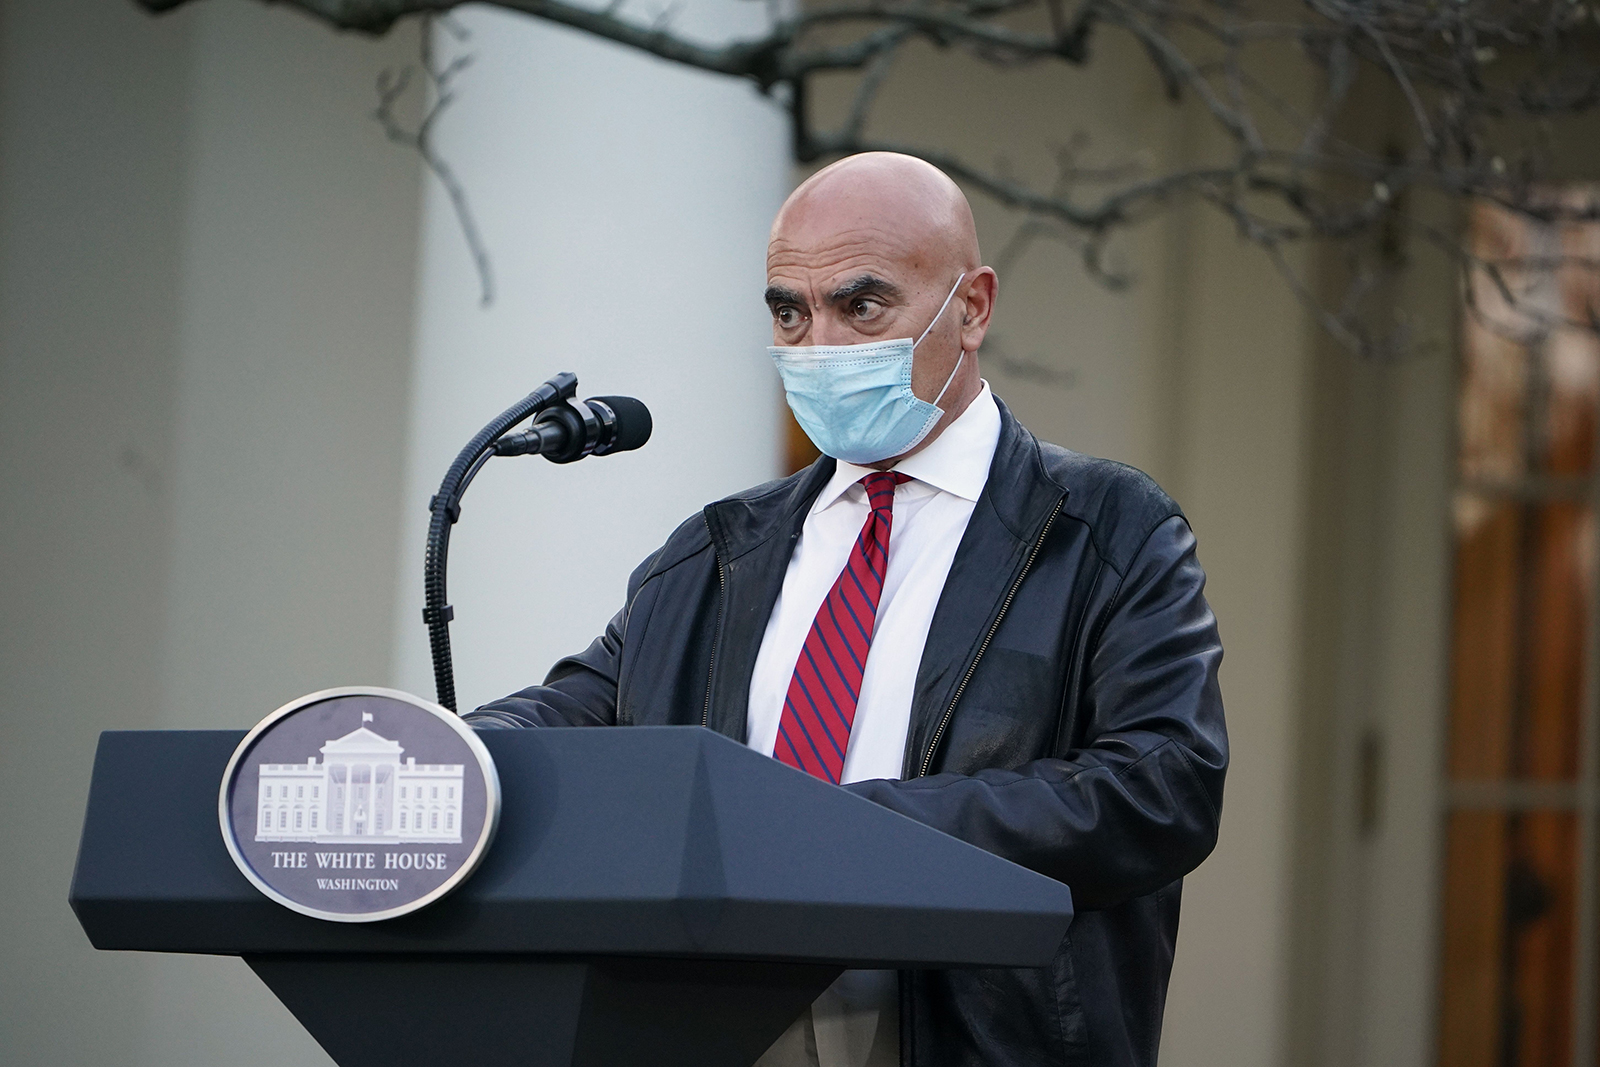 Dr. Moncef Slaoui, vaccine expert, delivers an update on "Operation Warp Speed" in the Rose Garden of the White House in Washington, DC on November 13.